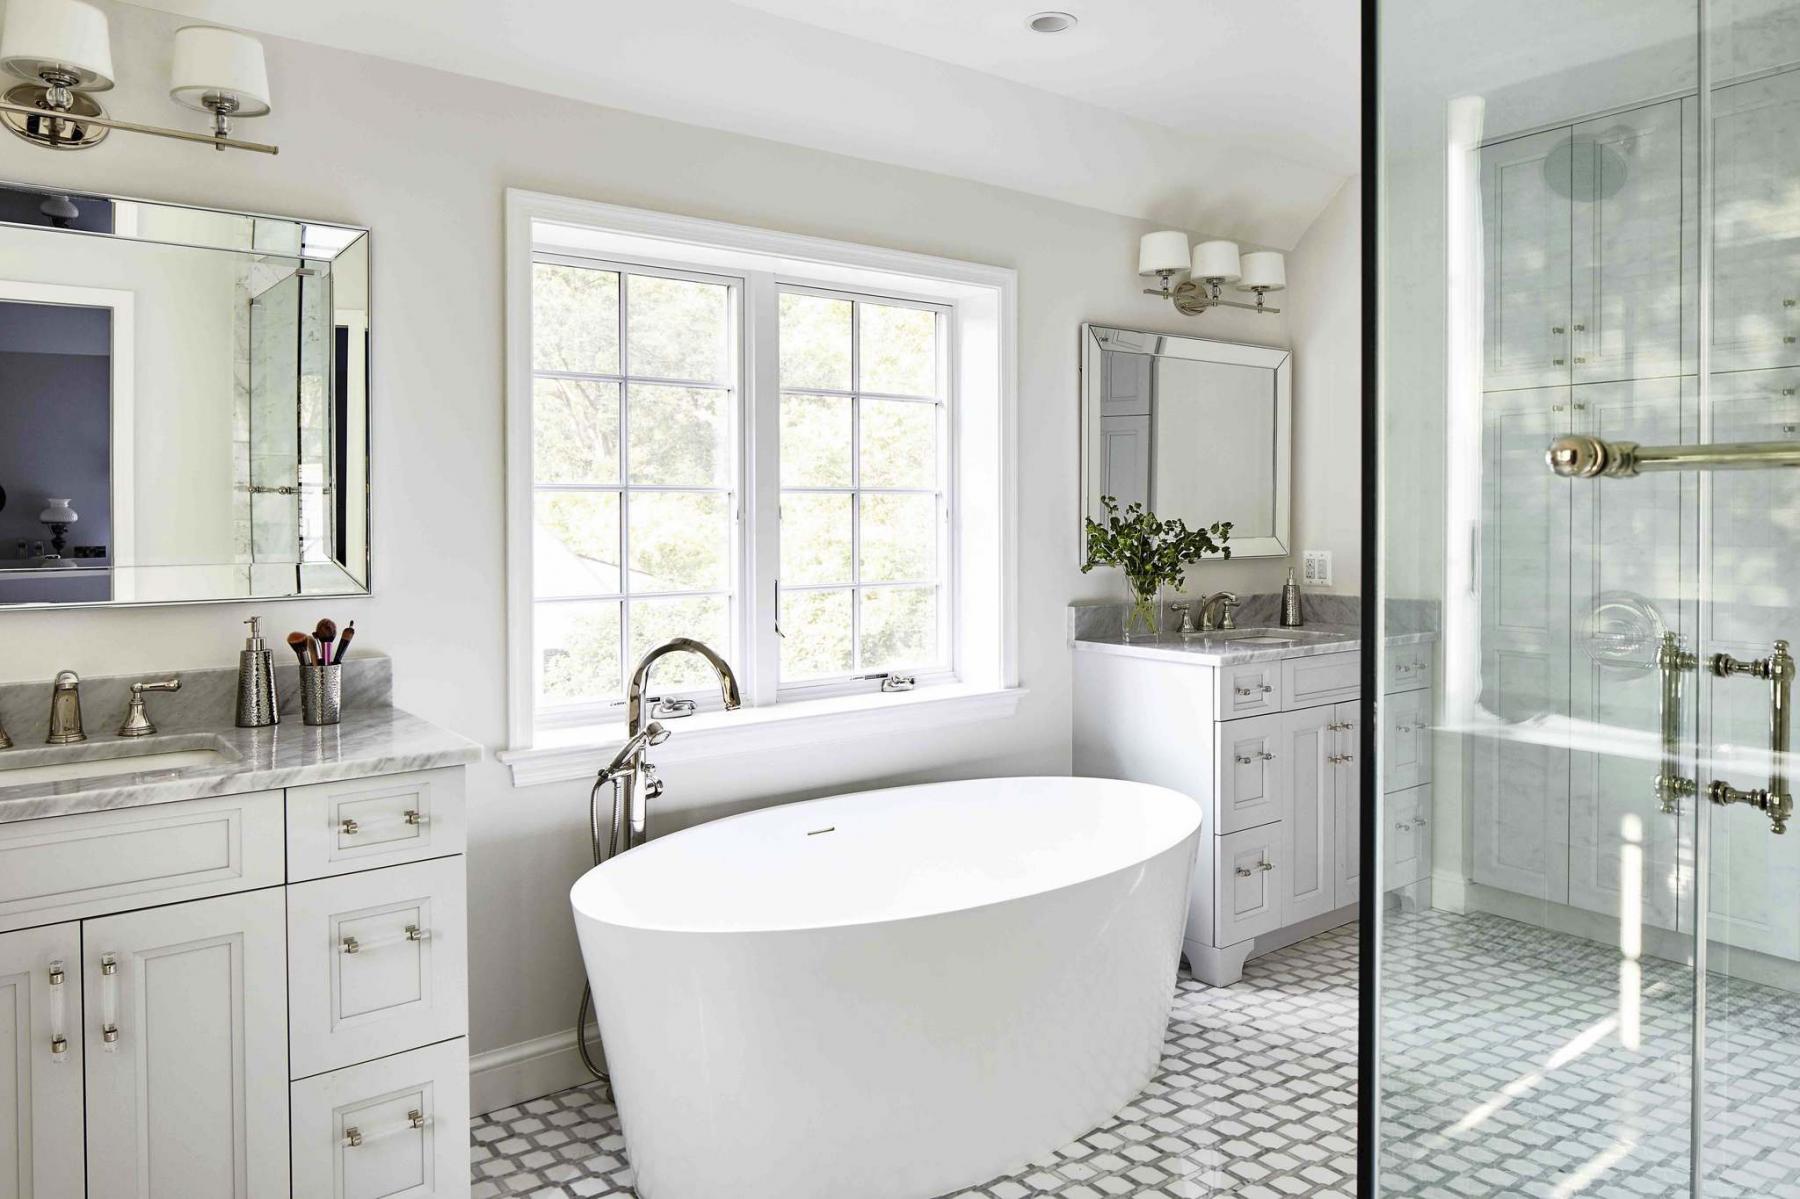 A Simple Bathroom Style Guide: Vintage, Minimalist and Rustic